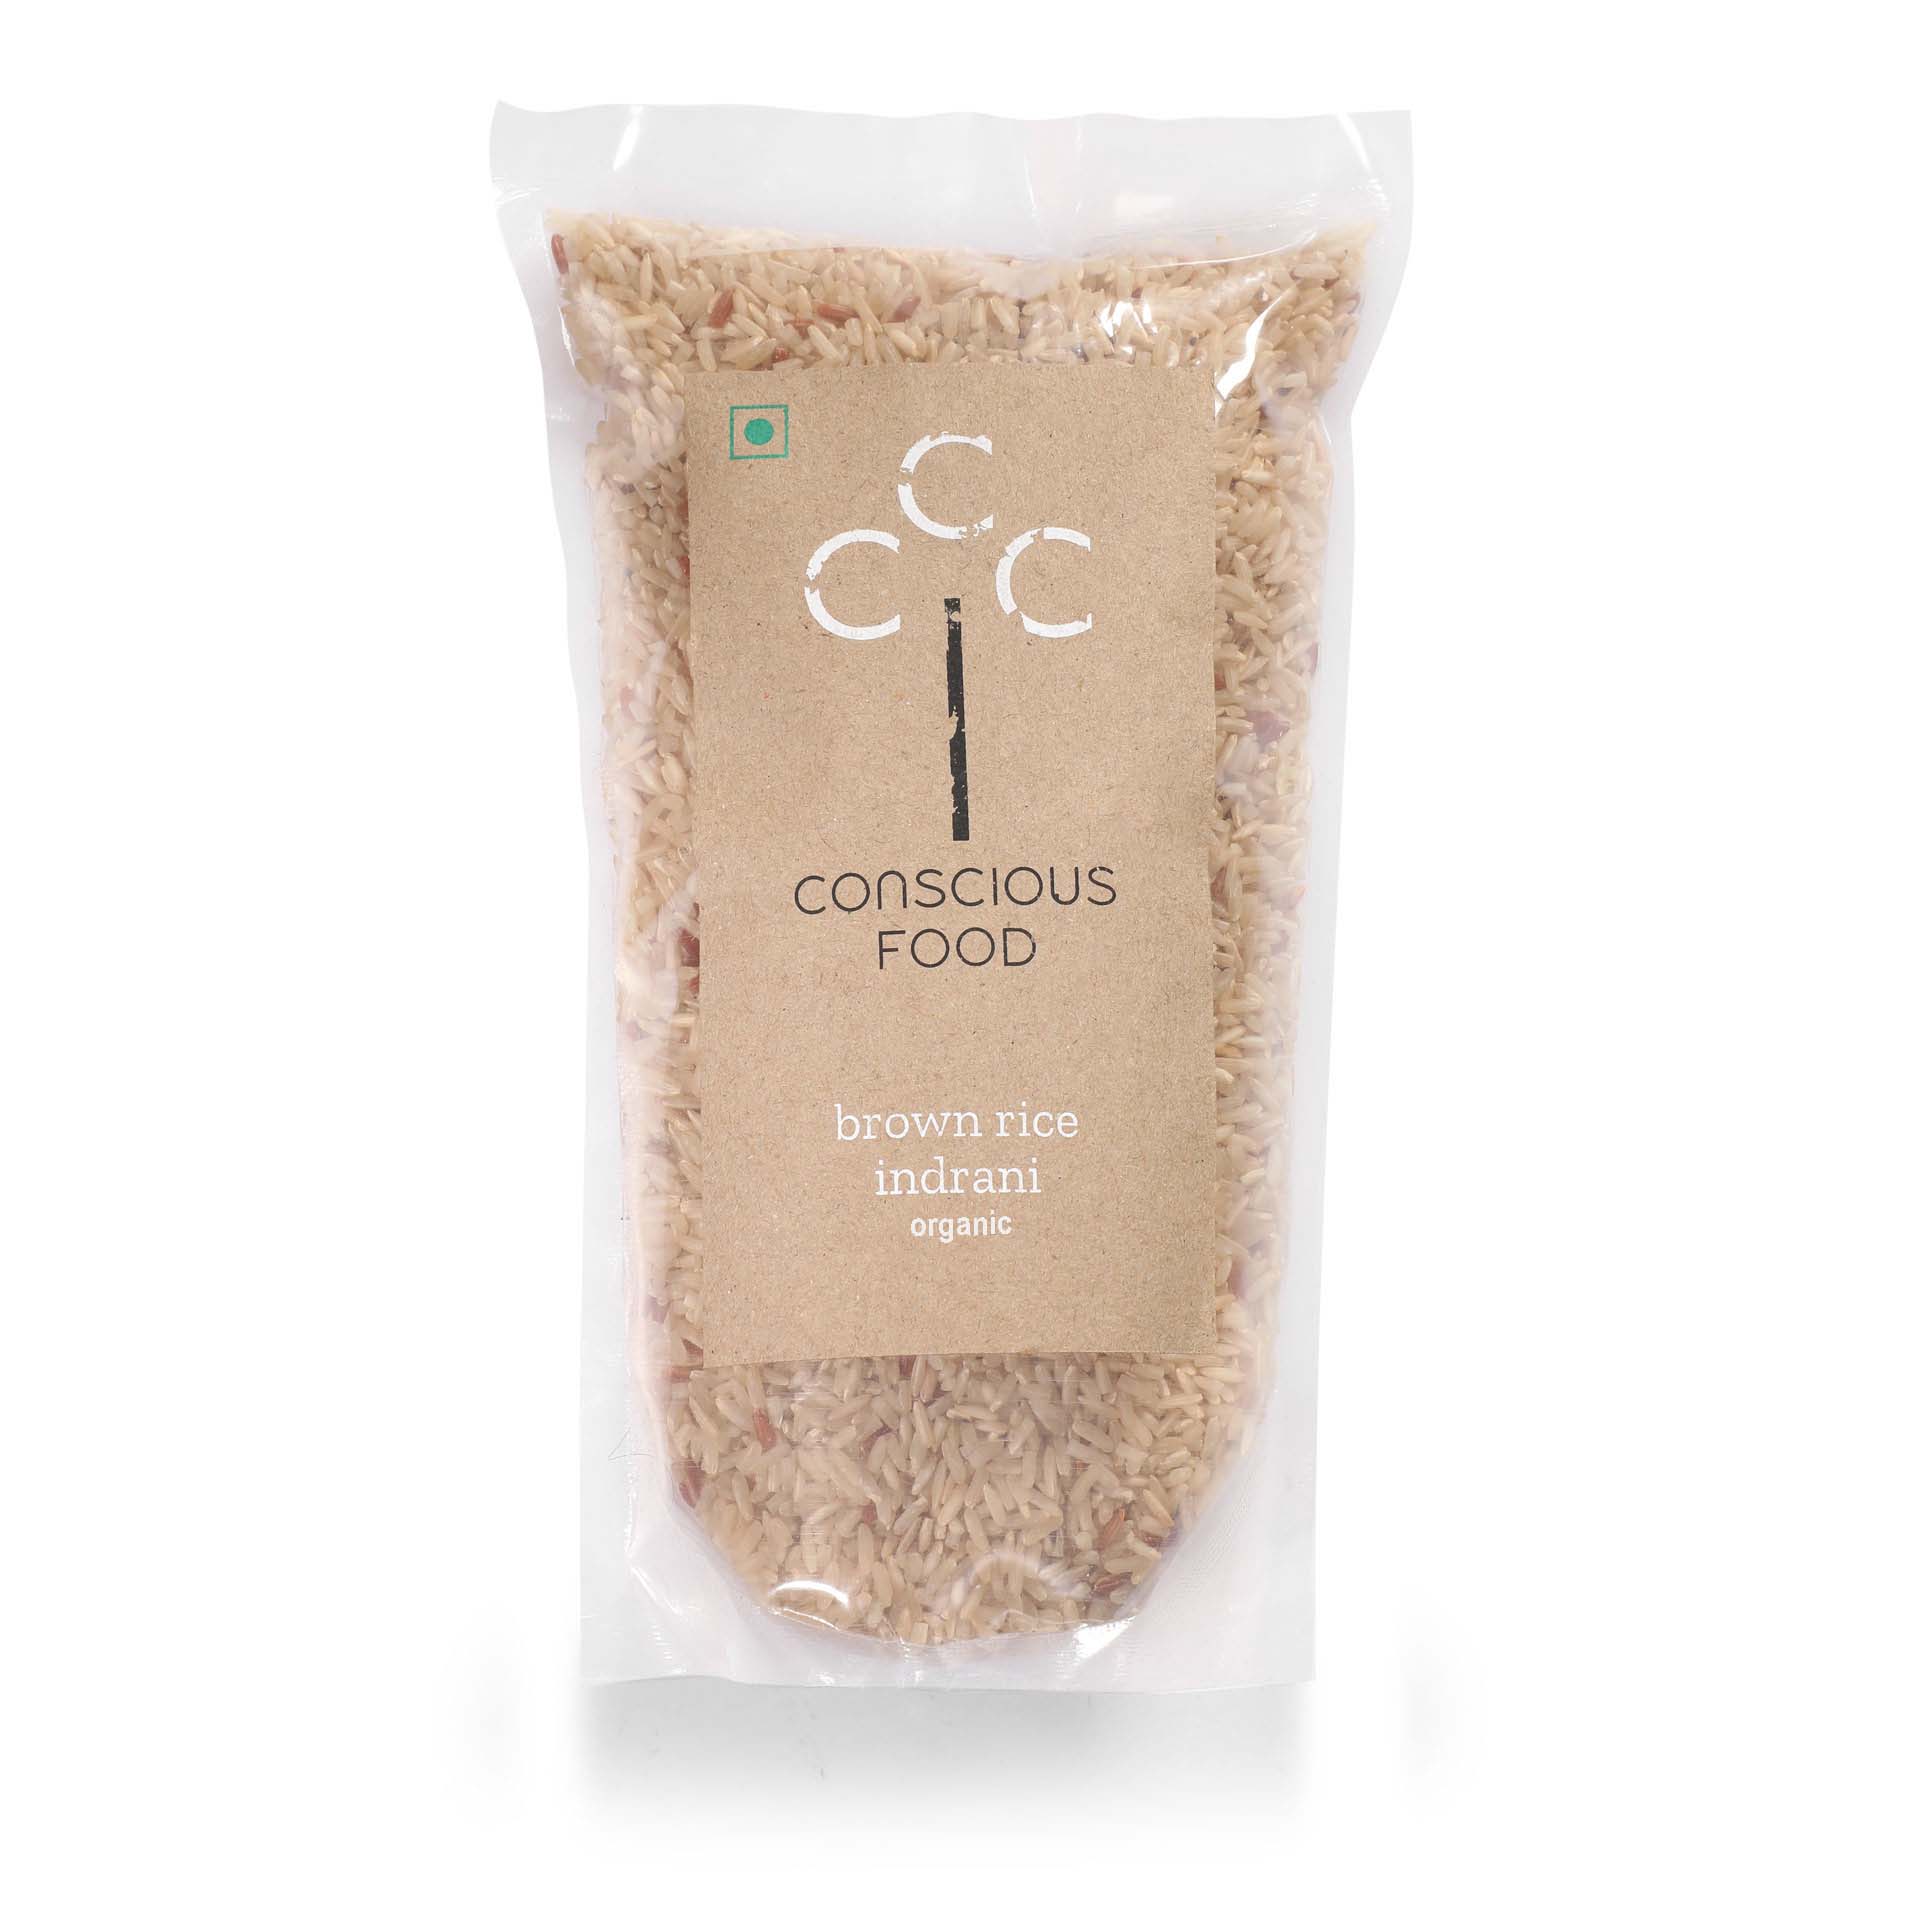 Product: Conscious Food Brown Rice (Indrani) 500g